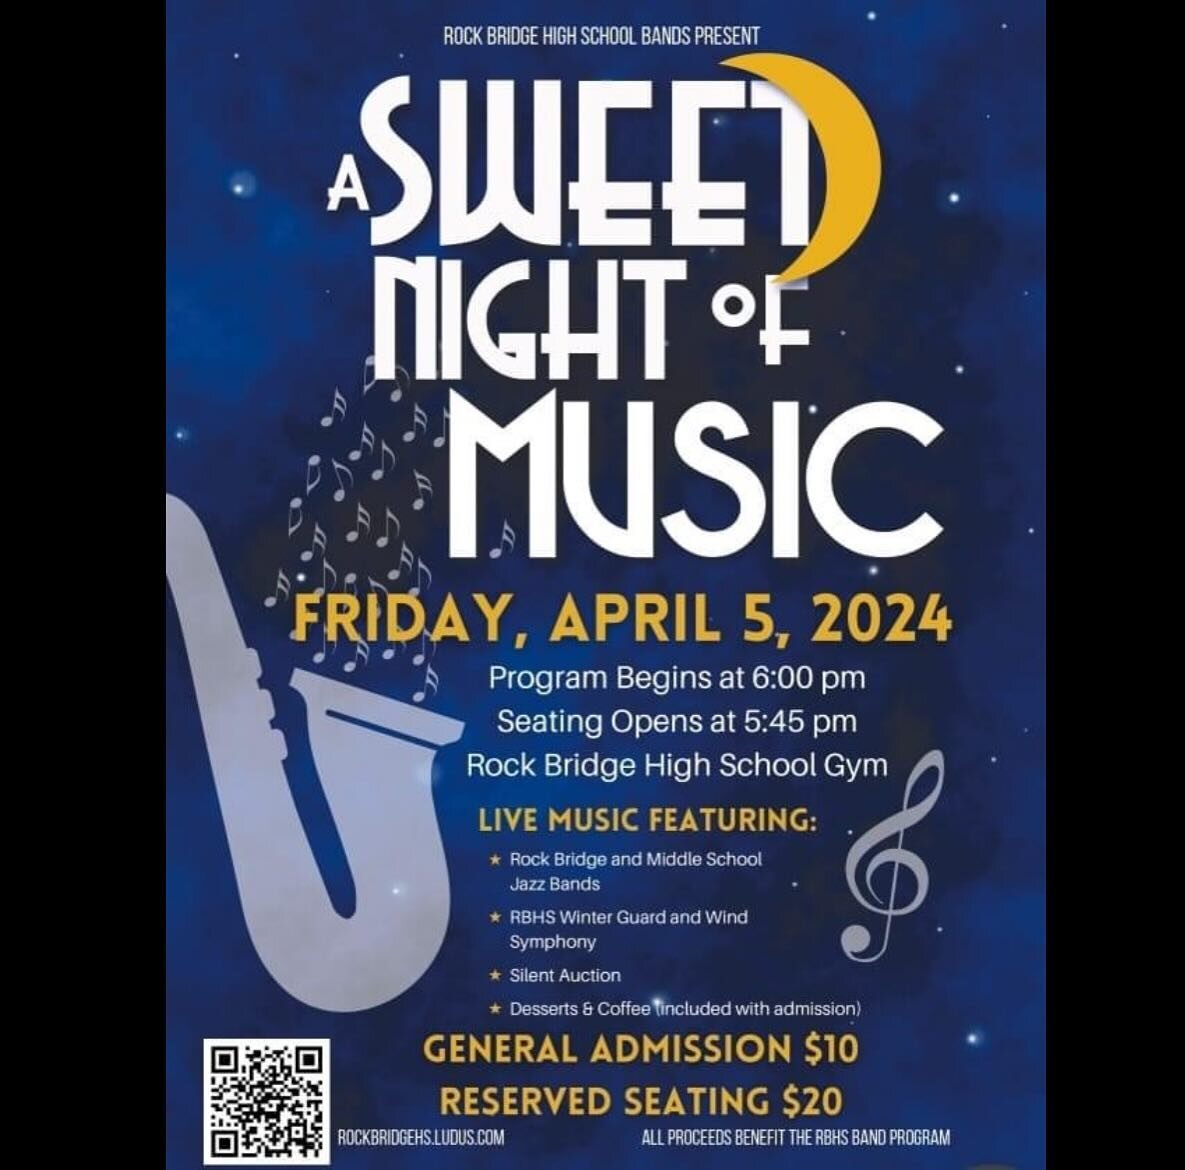 Tomorrow/Friday, April 5th is Sweet Night of Music in the Rock Bridge Gyms. This is a wonderful evening of band performances, desserts, and a silent auction.

We have a guest artist, Marcus Lewis, performing with the bands that evening. Marcus Lewis 